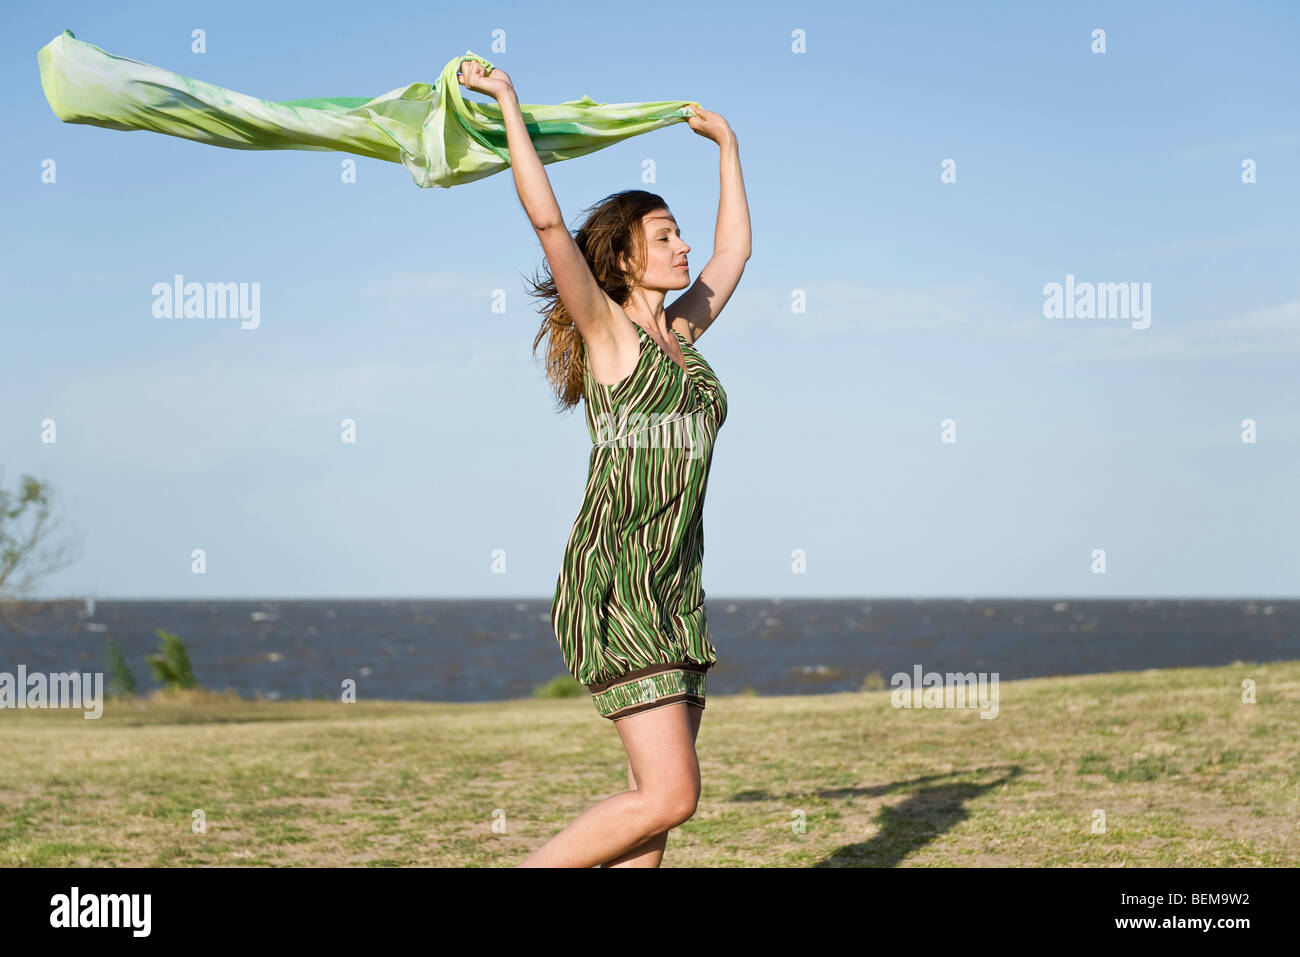 Woman walking in wind, holding up shawl in the air, full length Stock Photo